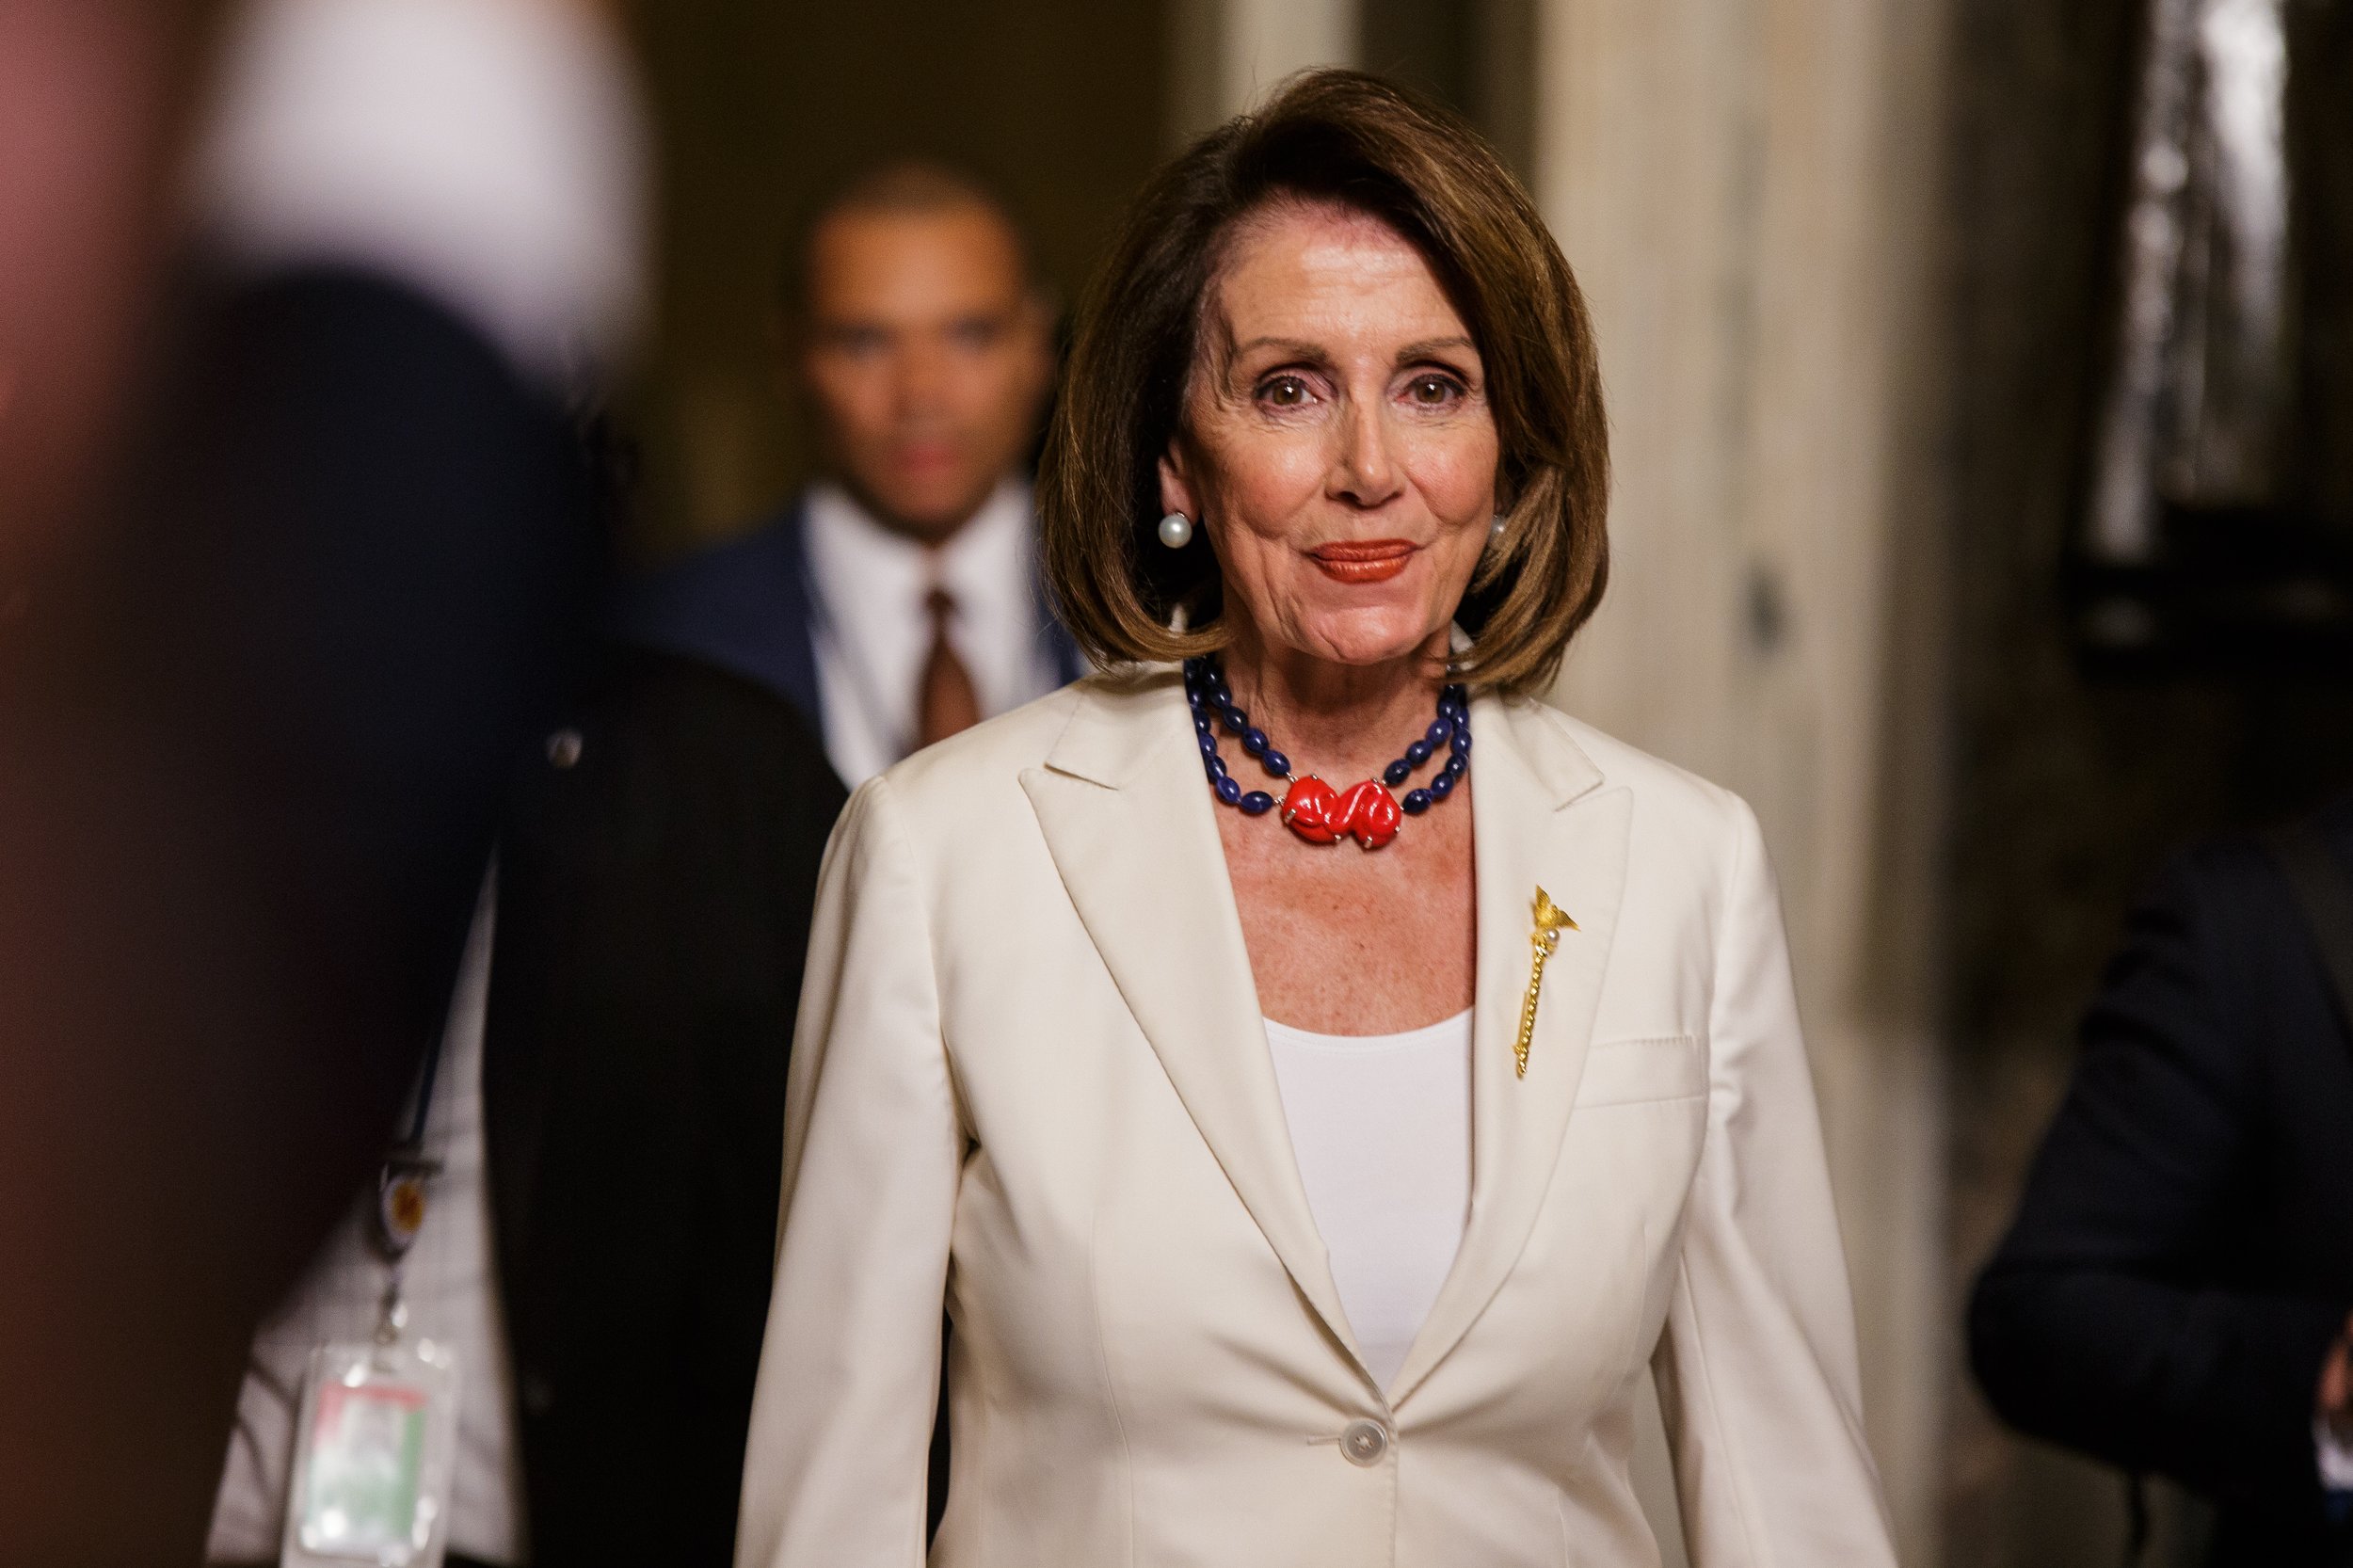  Rep. Nancy Pelosi (D-CA) walks through Statuary Hall to attend the State of the Union address.    February 2019   